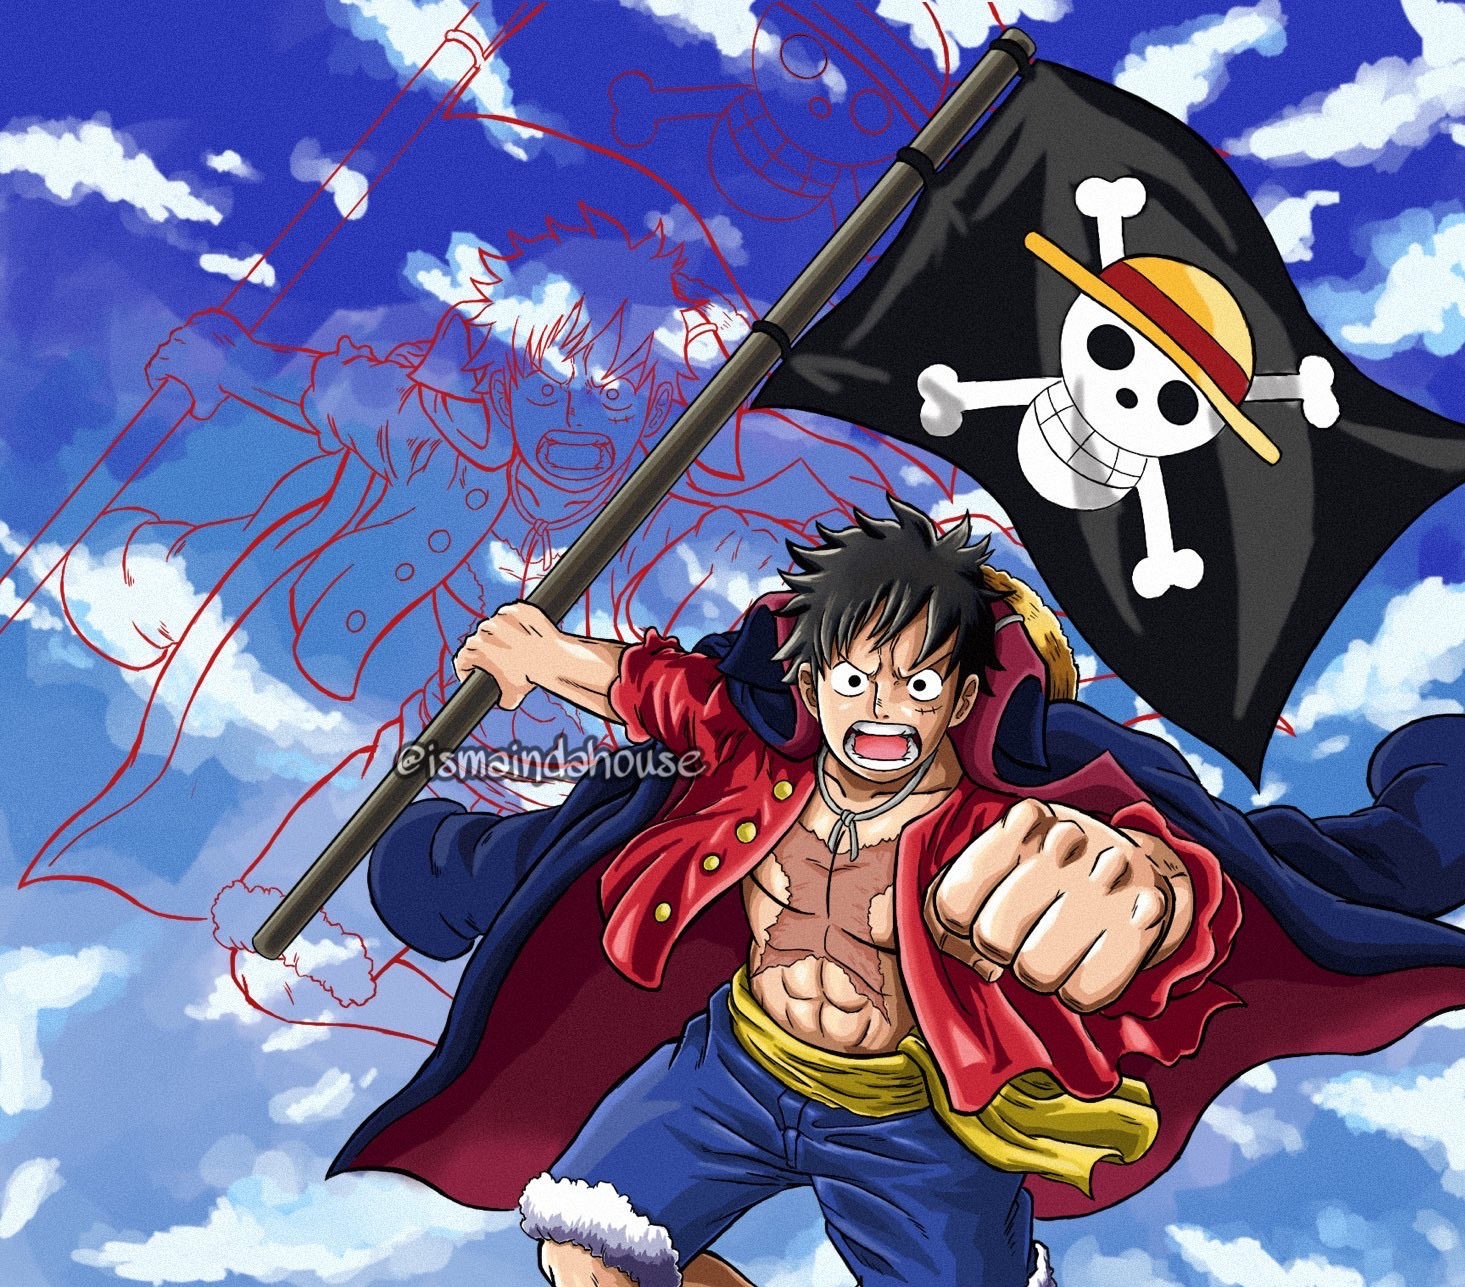 One Piece - Monkey D. Luffy by OnePieceWorldProject on DeviantArt